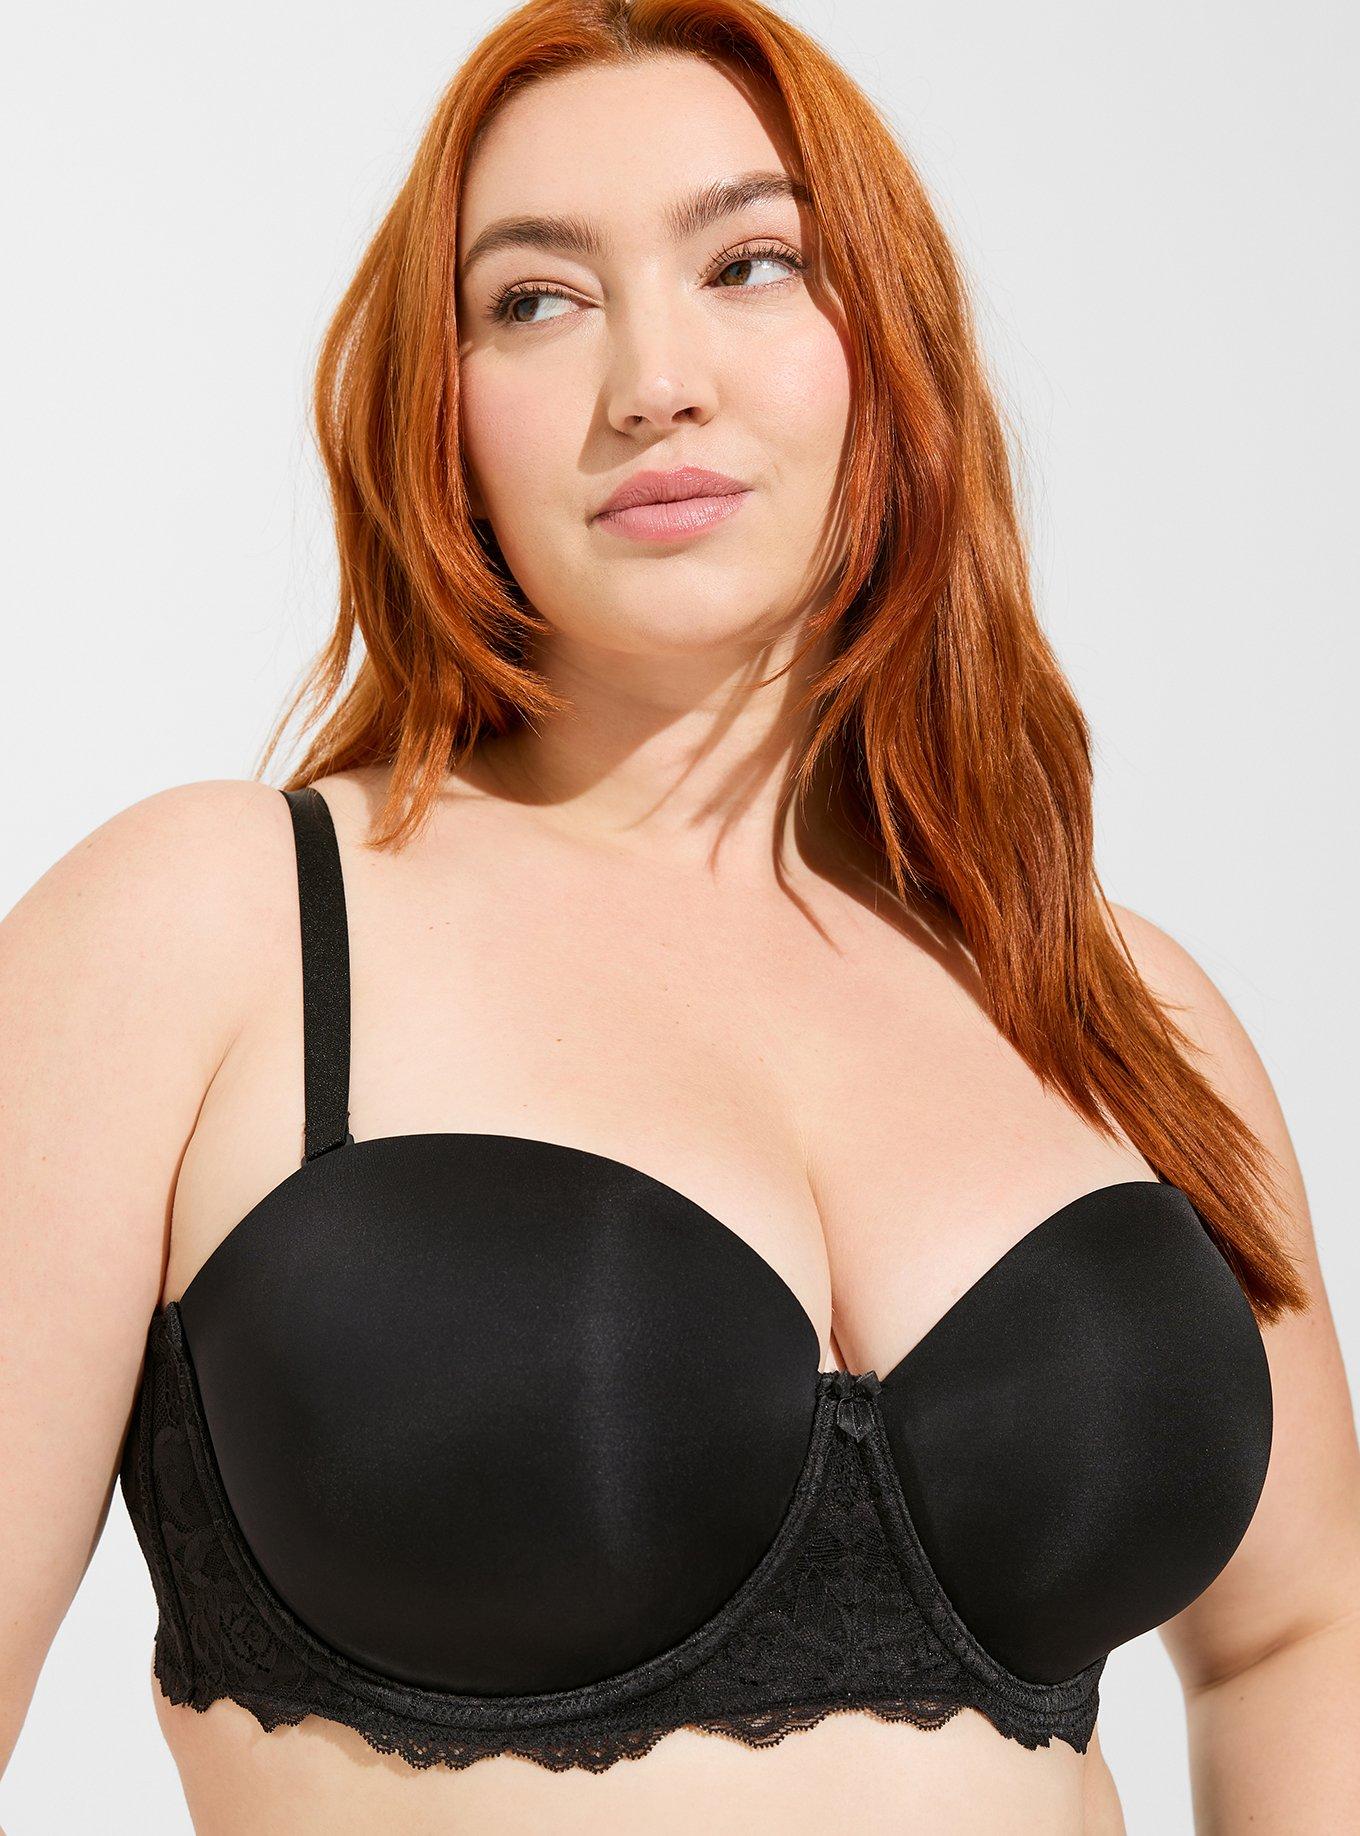 I'm a 36G and found a strapless bra that feels supportive - it